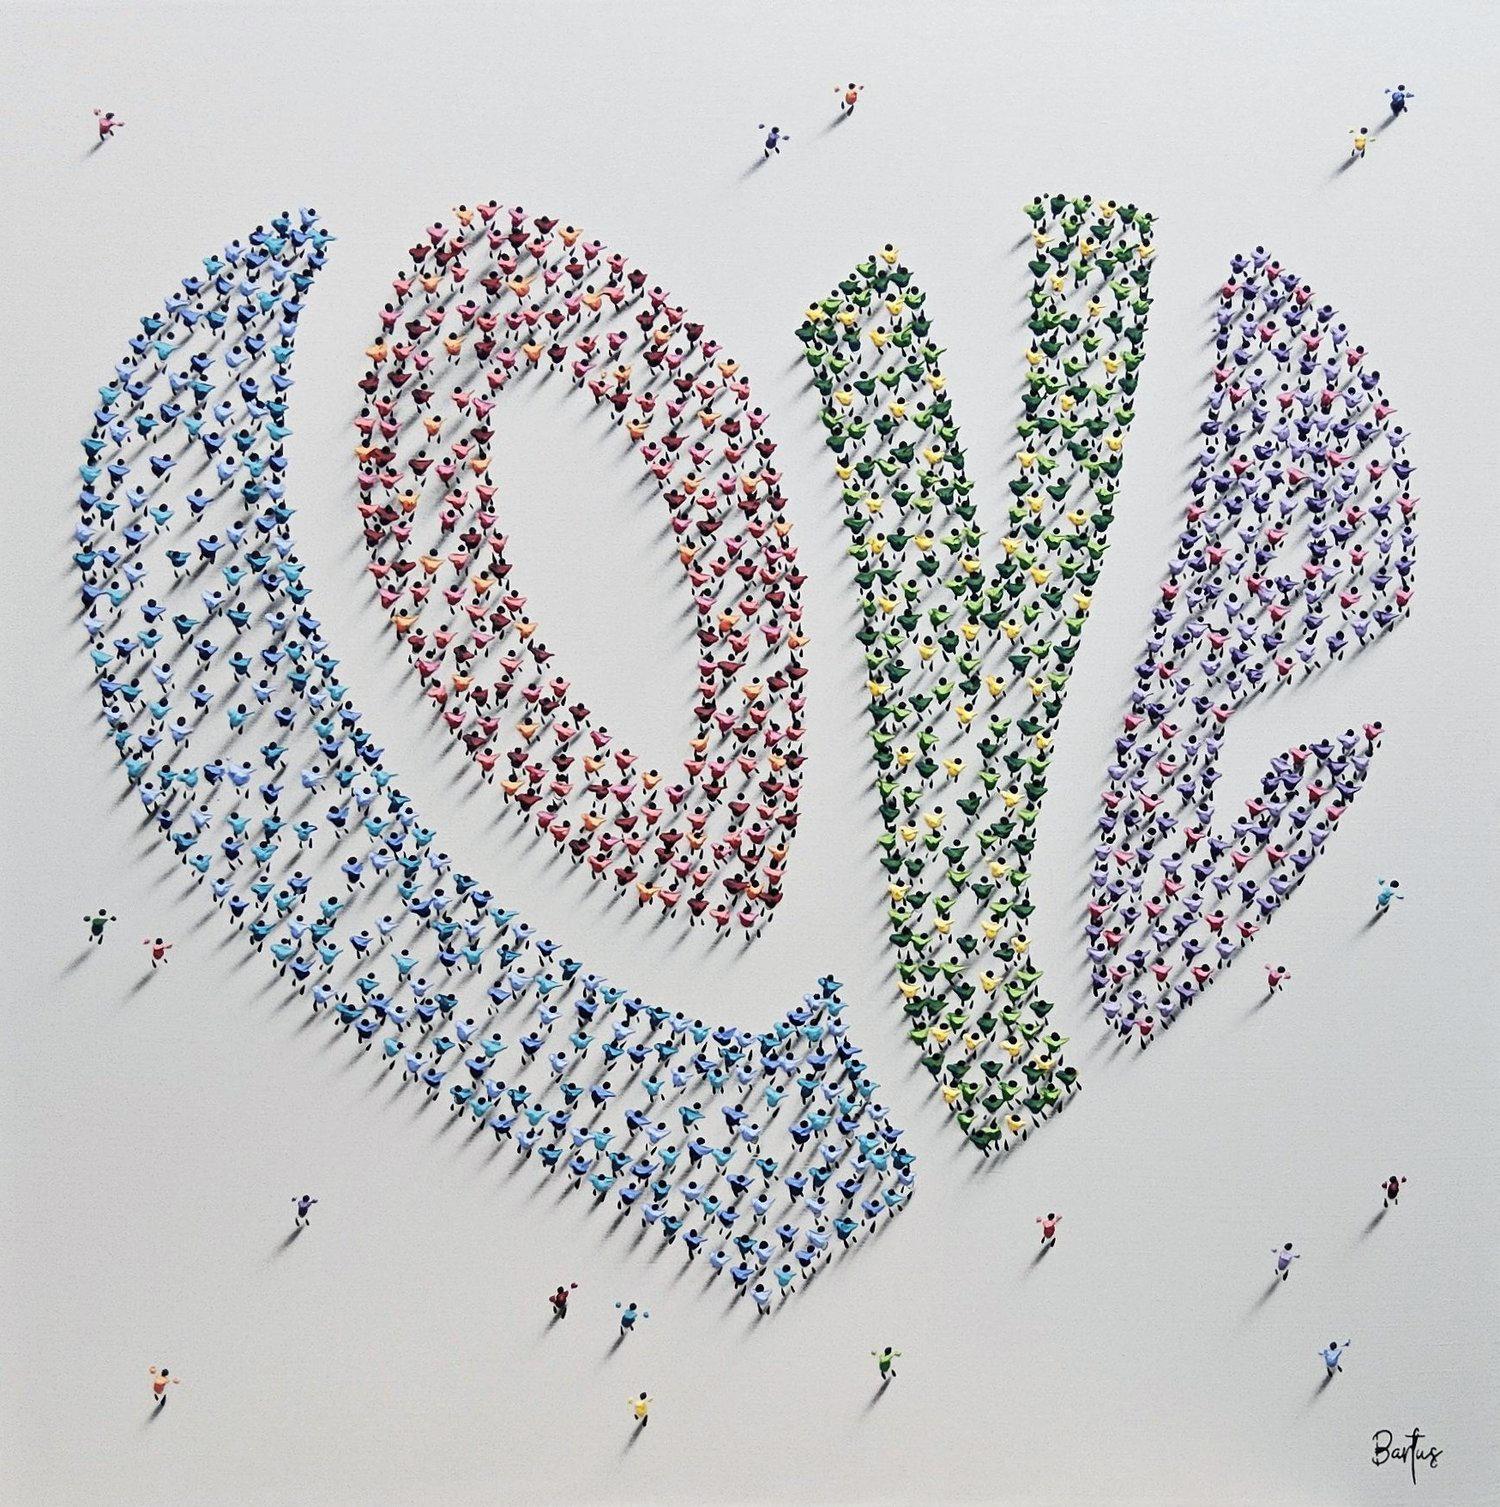 This piece, "Heart Full of Love", is a 40x40 mixed media painting on canvas by artist Francisco Bartus. Featured is a loose heart shape made up of individual helpings of paint, spelling out the word LOVE.  The figures are strategically placed and